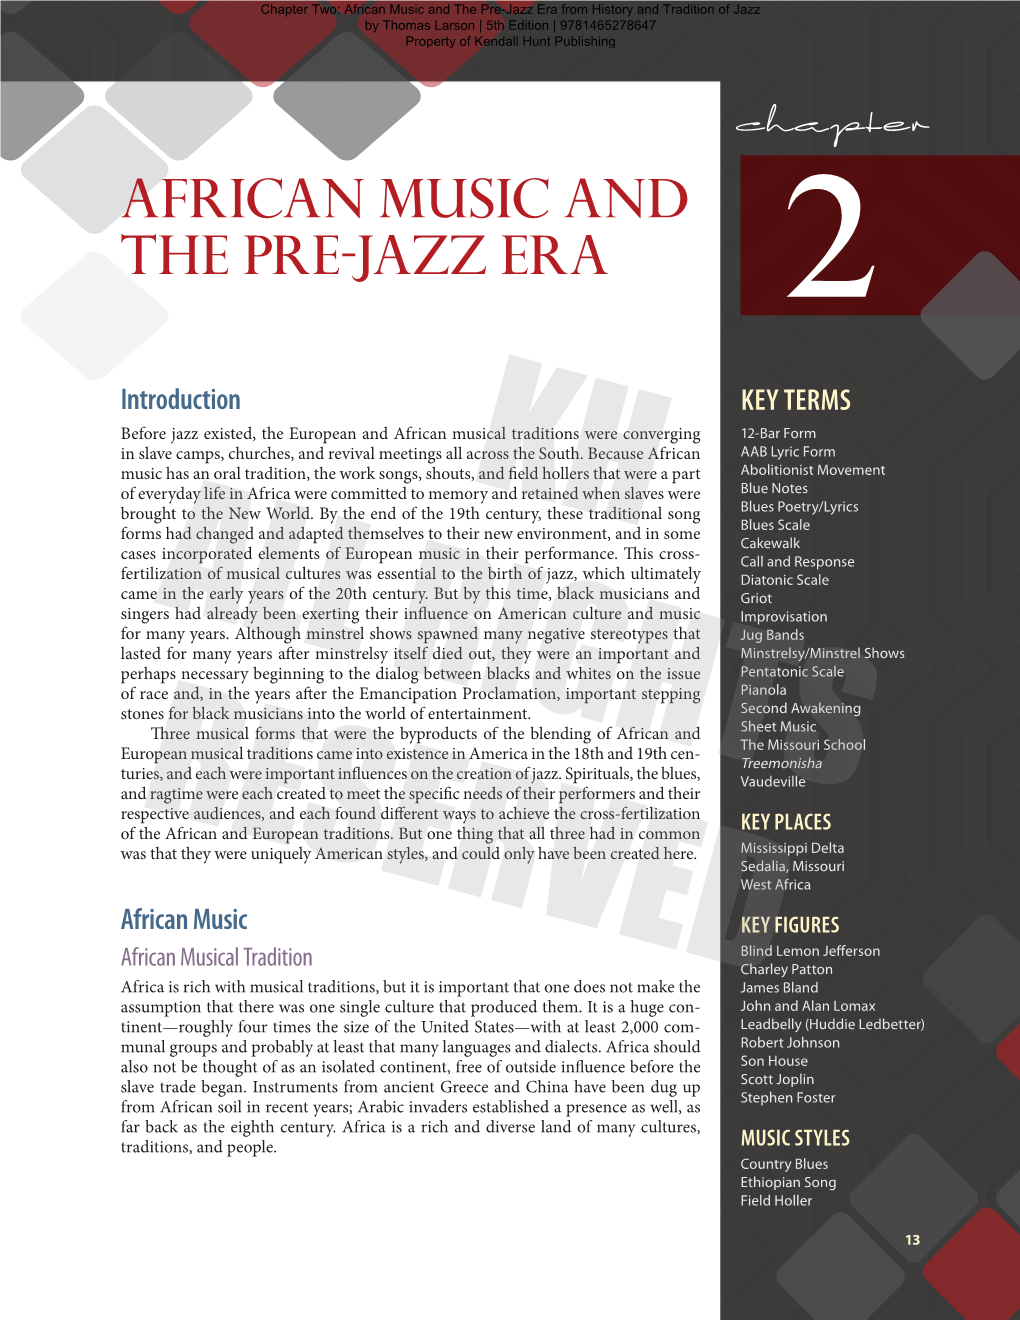 African Music and the Pre-Jazz Era from History and Tradition of Jazz by Thomas Larson | 5Th Edition | 9781465278647 Property of Kendall Hunt Publishing